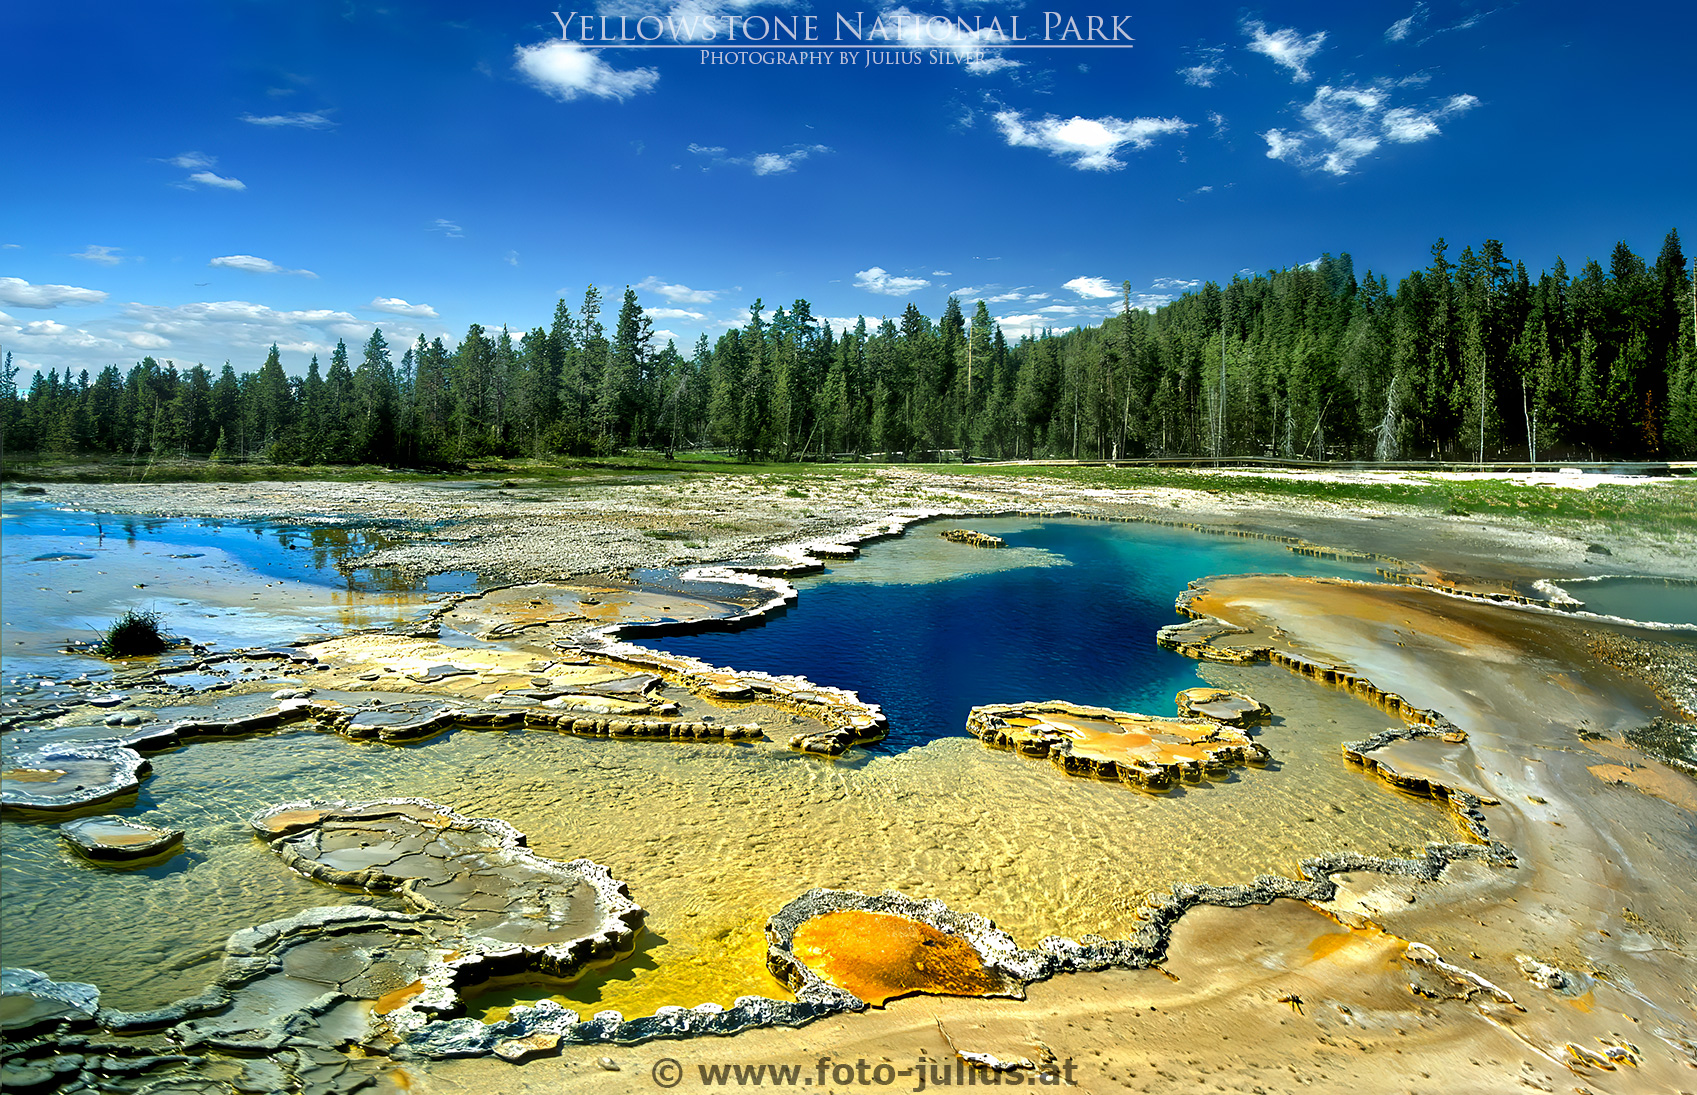 y032a_Doublet_Pool_Yellowstone.jpg, 1,2MB